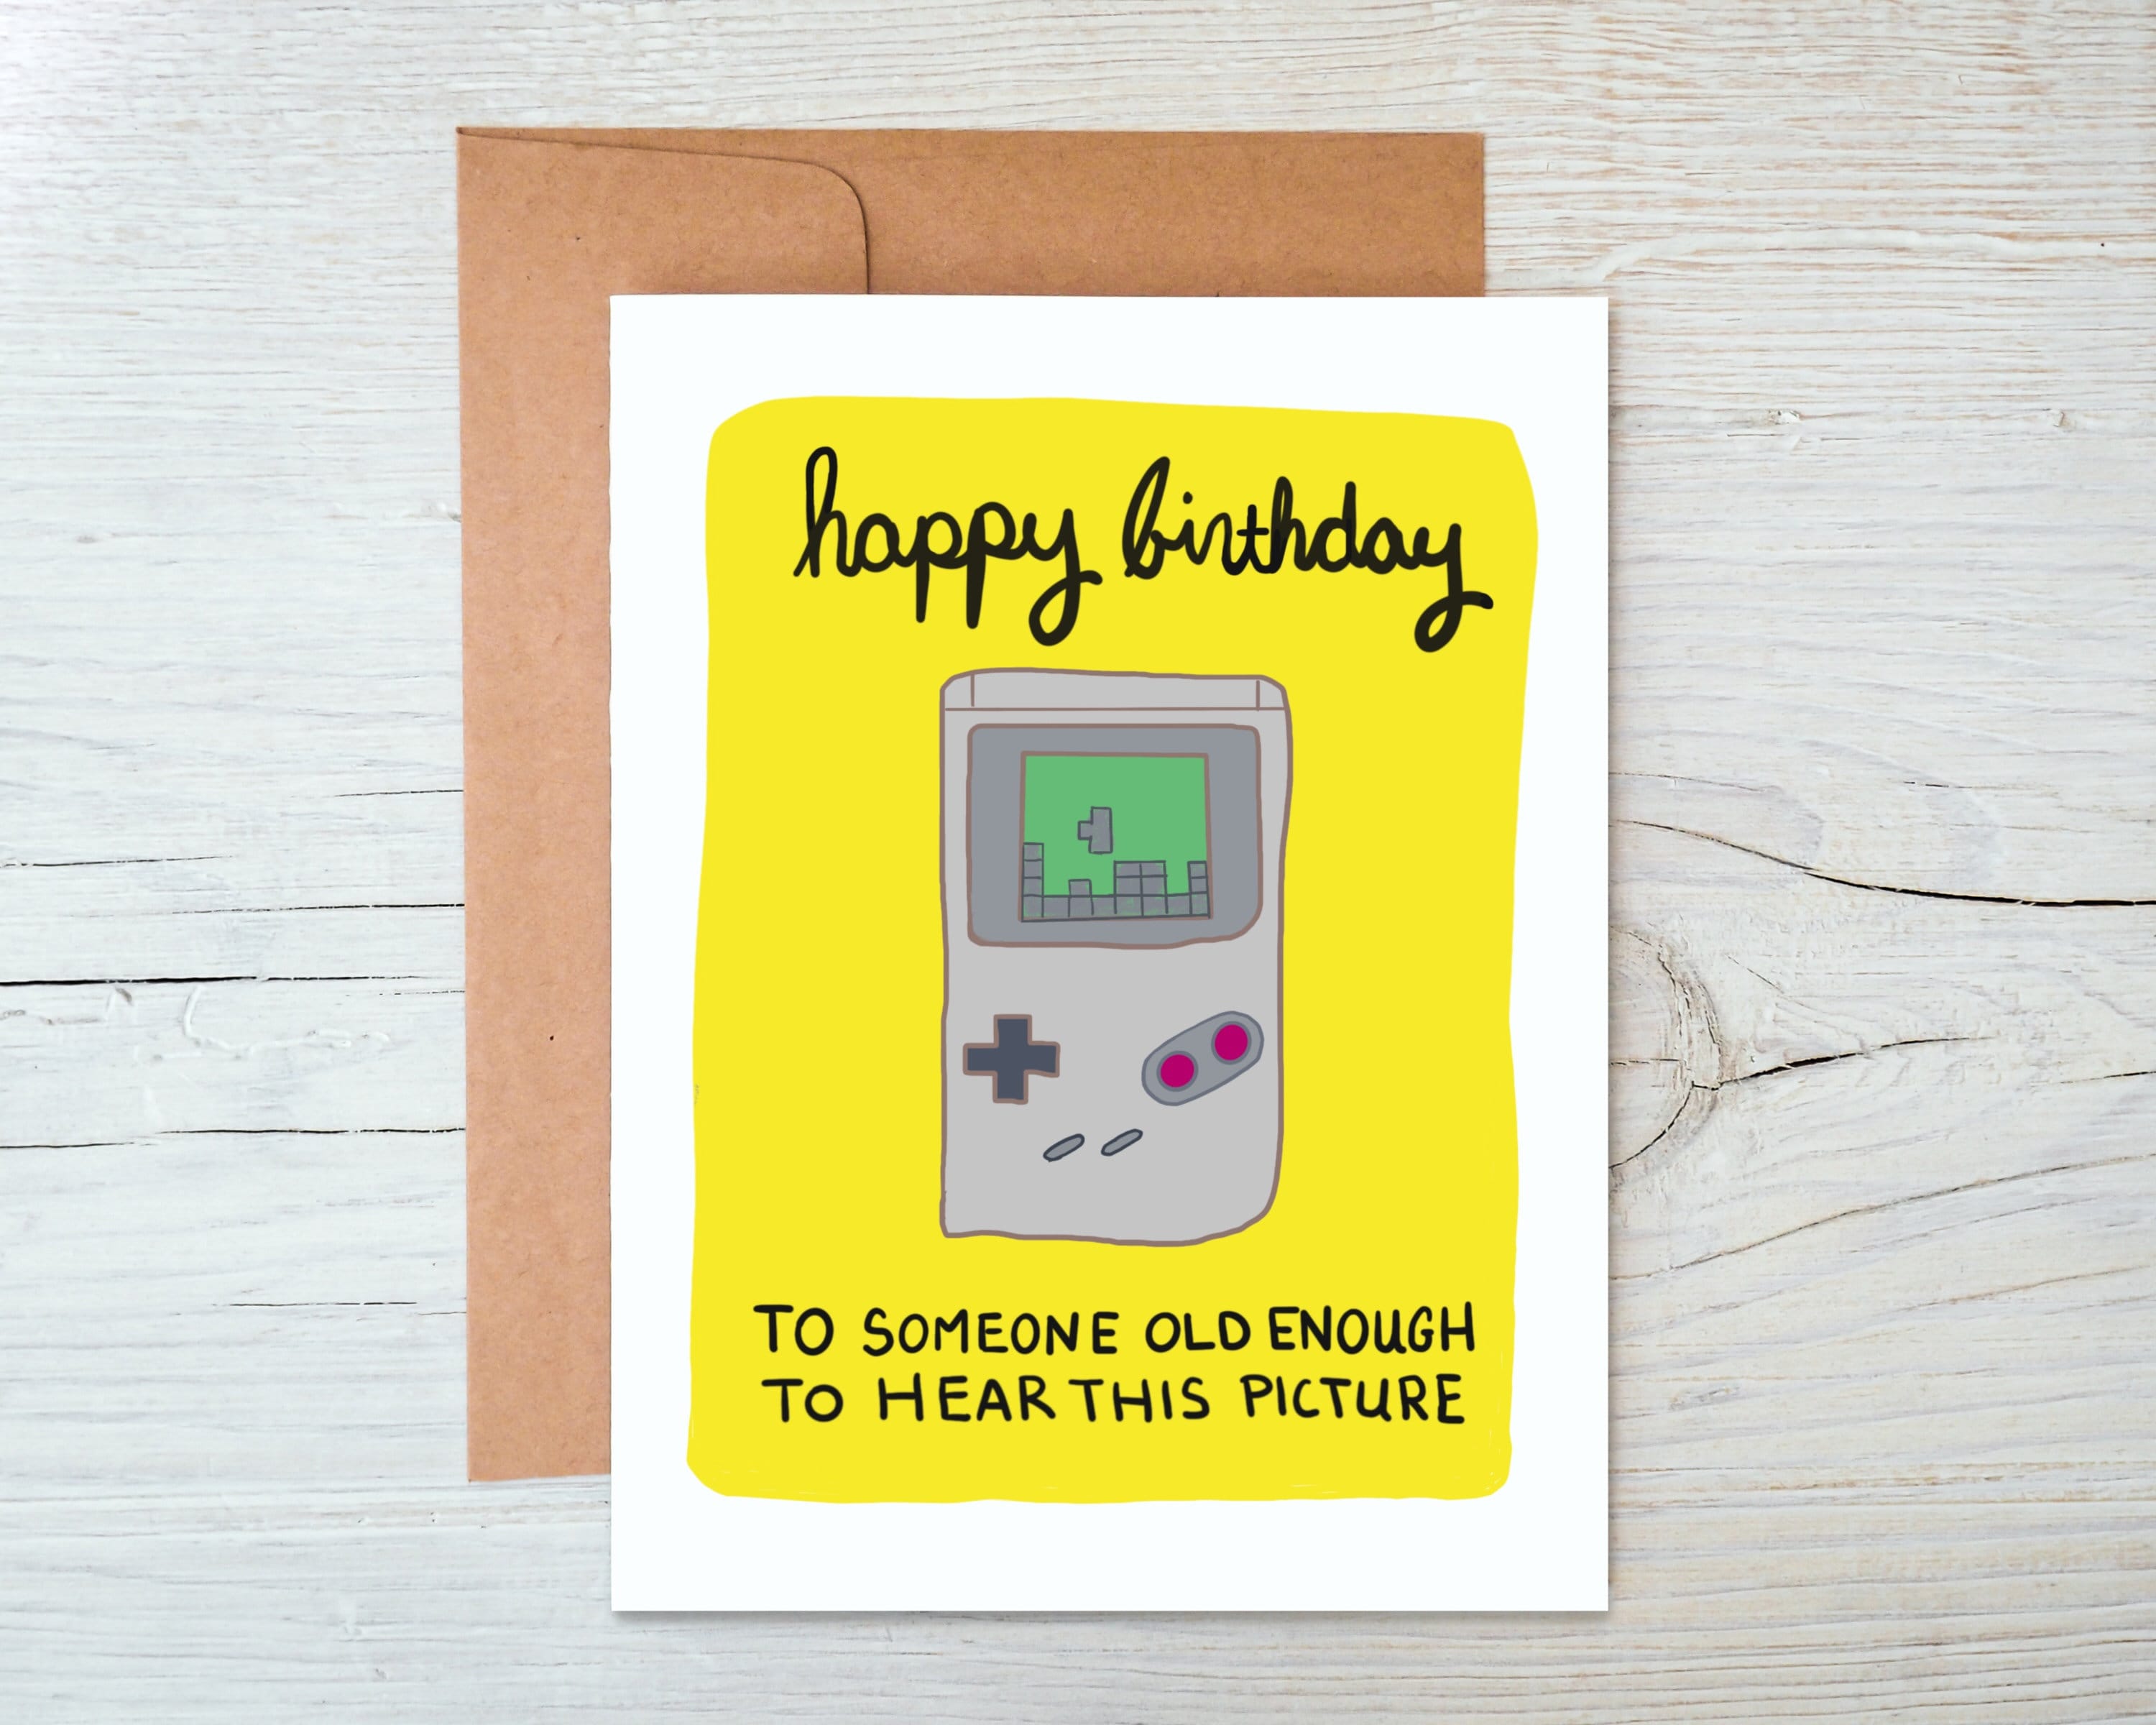 Happy birthday to all our GameBoy. 27 years old today. - GIF - Imgur